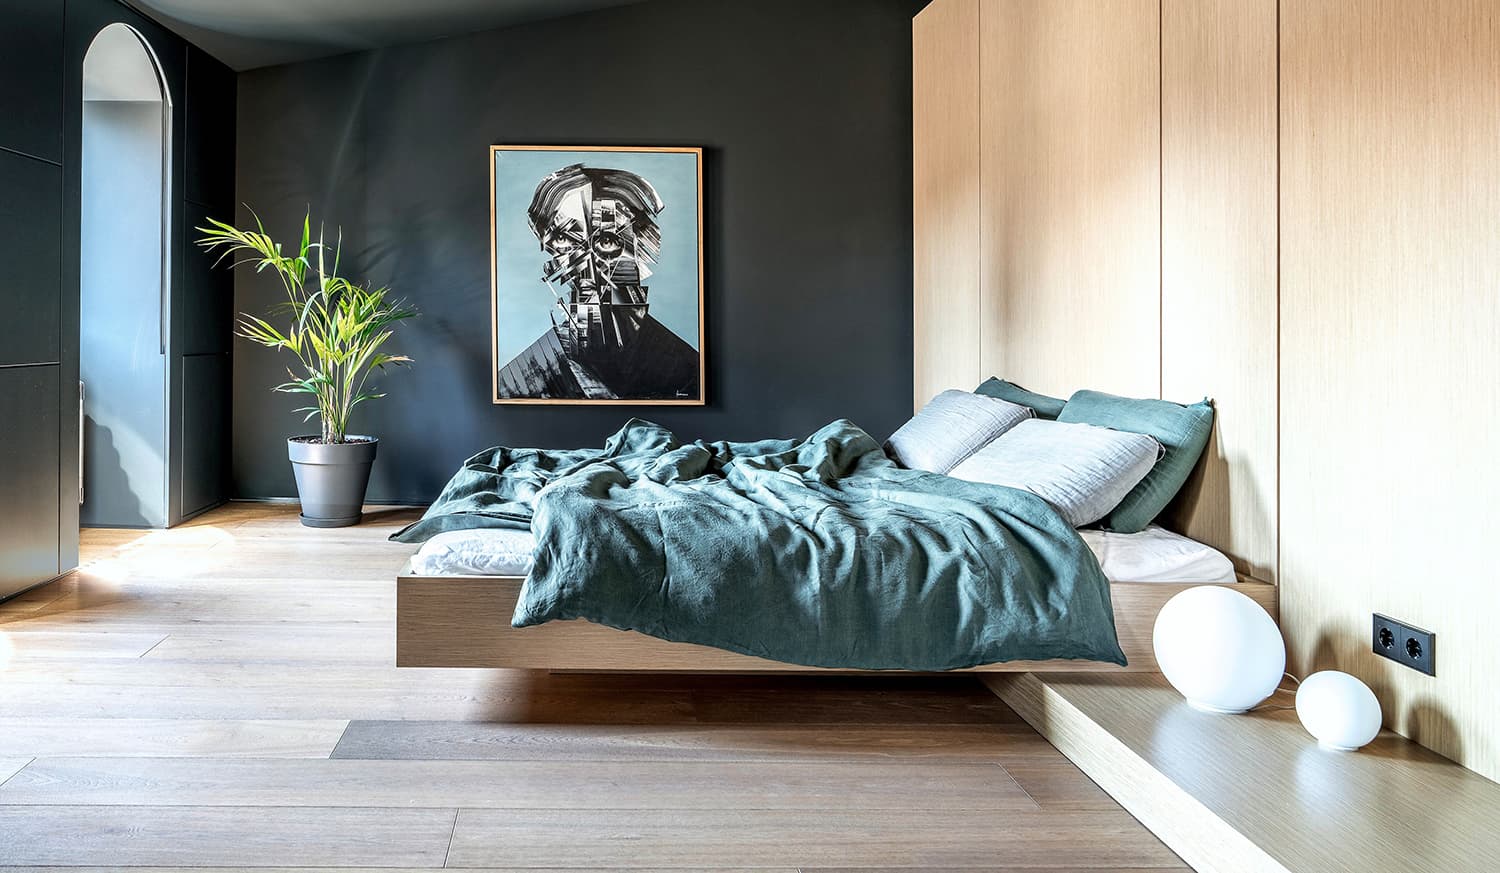 Modern bedroom with artwork on the walls